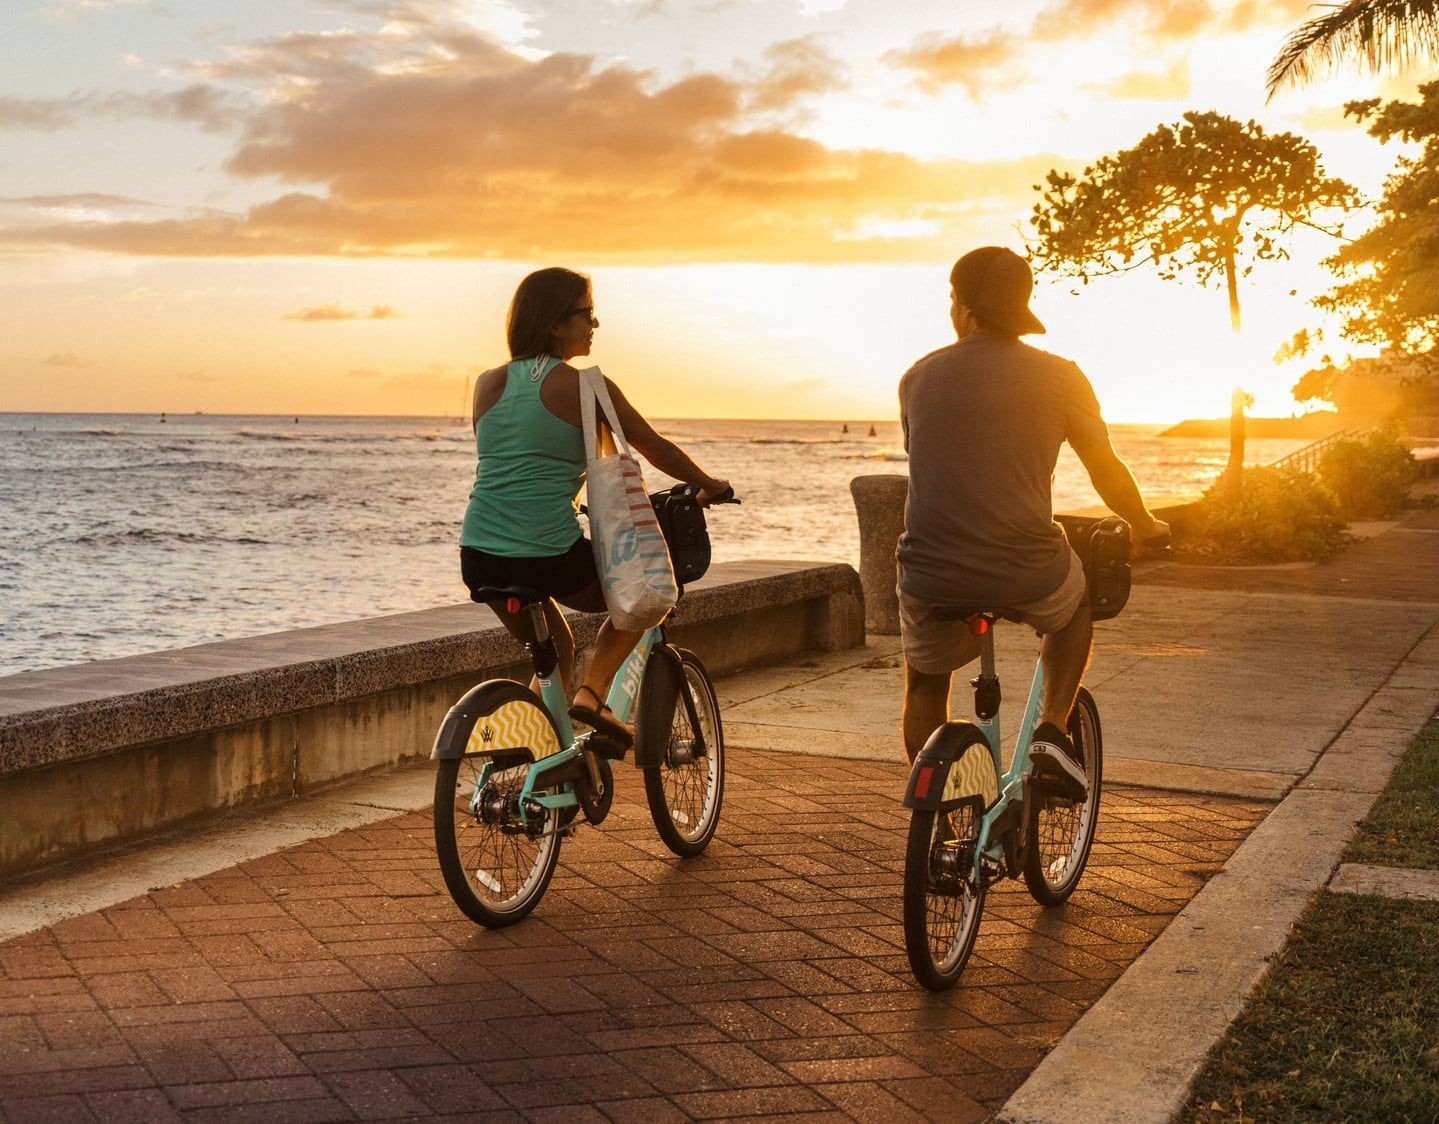 Get outside and enjoy the neighborhood by bike! Cruise down bike-friendly streets, pedal along scenic parks and coastlines, and stop for a picnic break under a monkeypod tree.